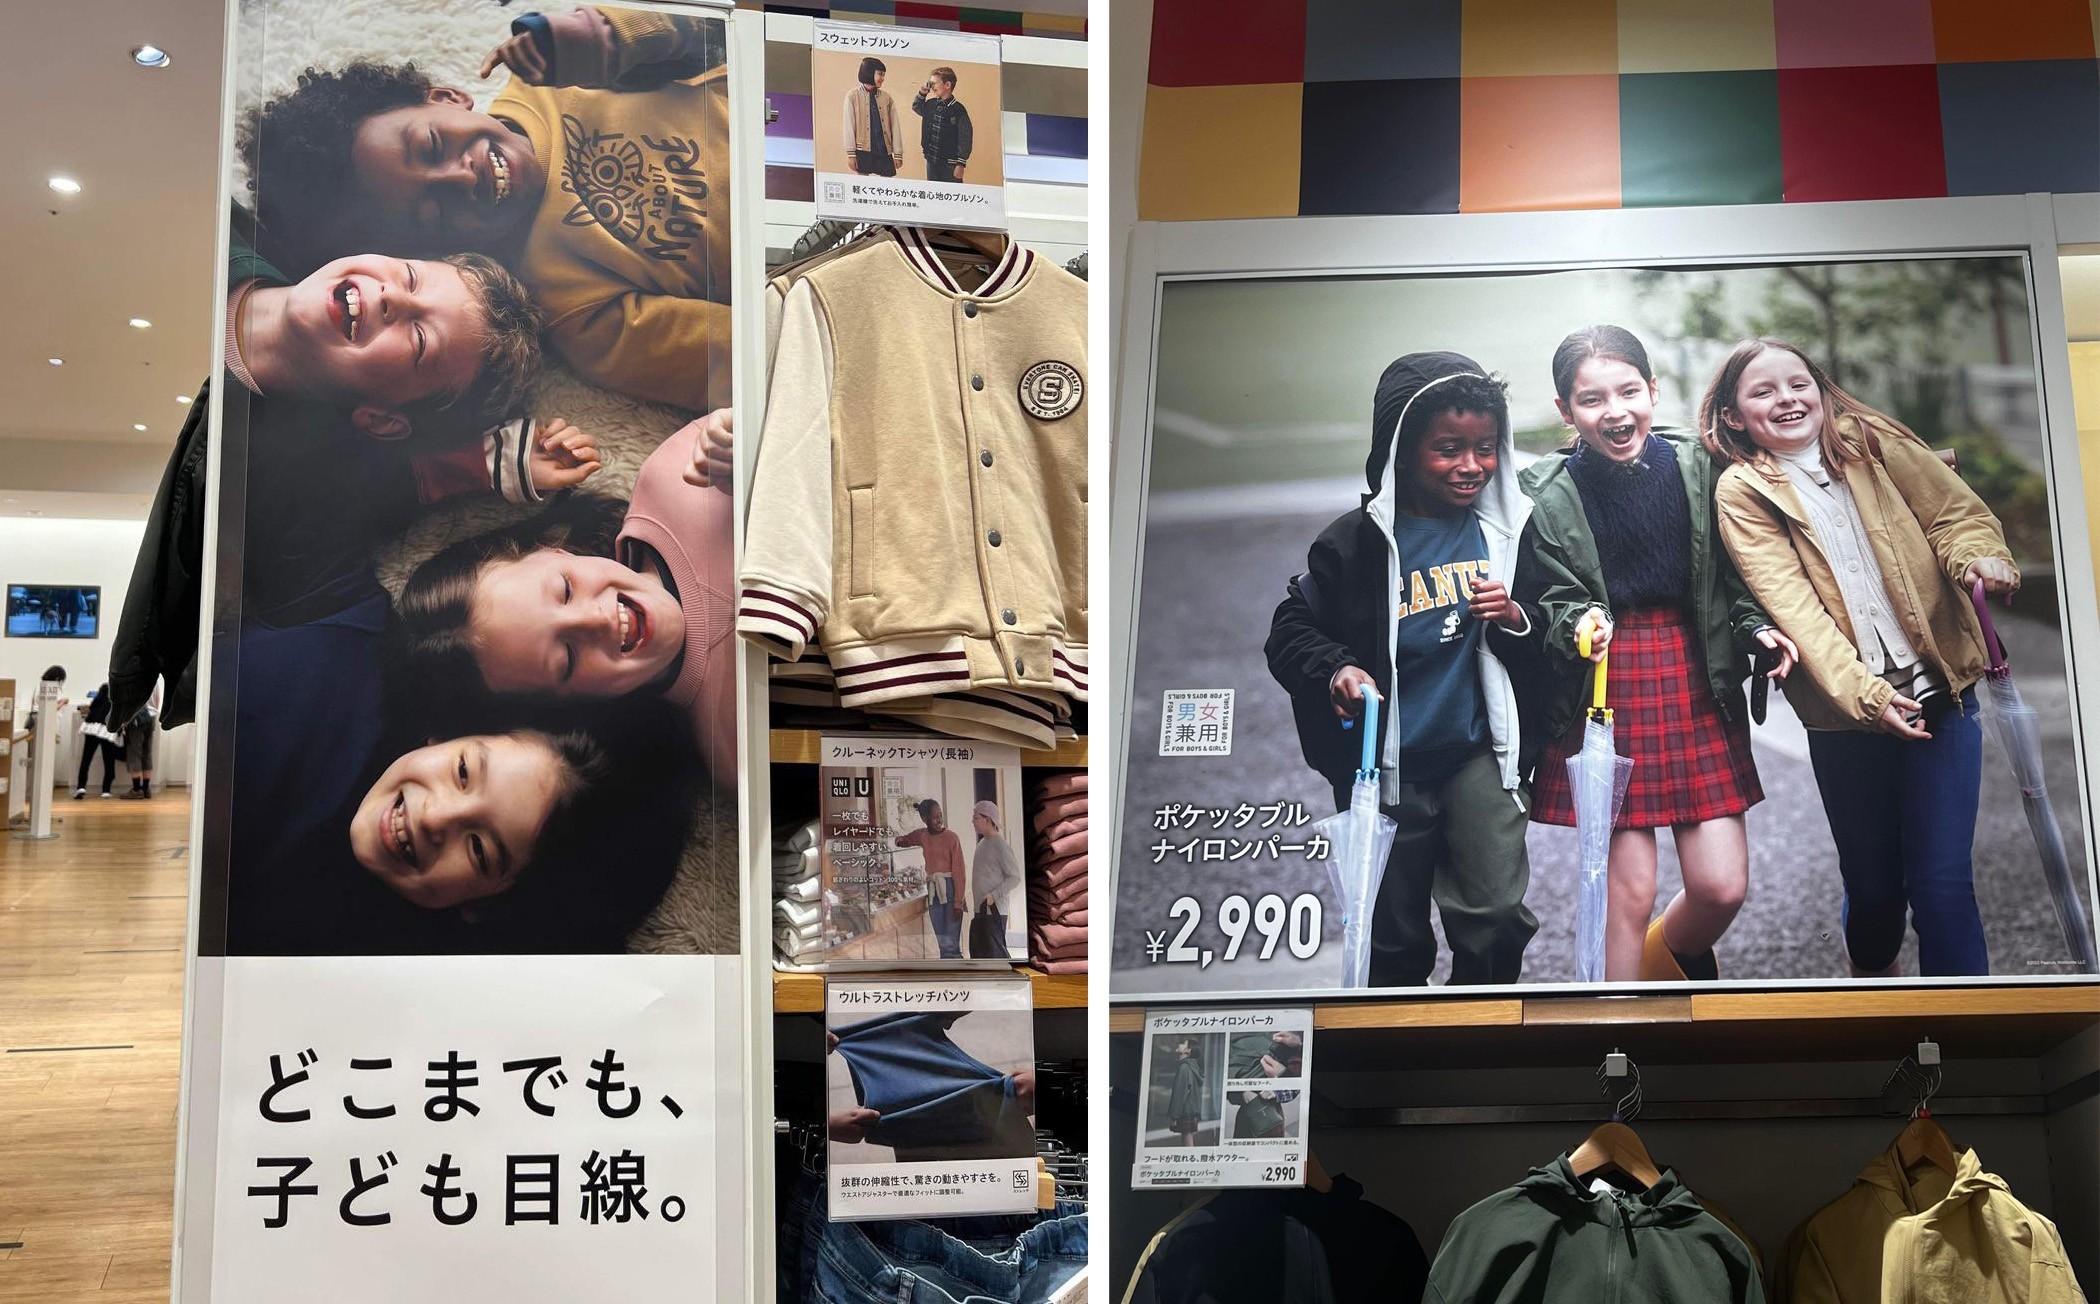 American military youth strike a pose in Japan's modeling world